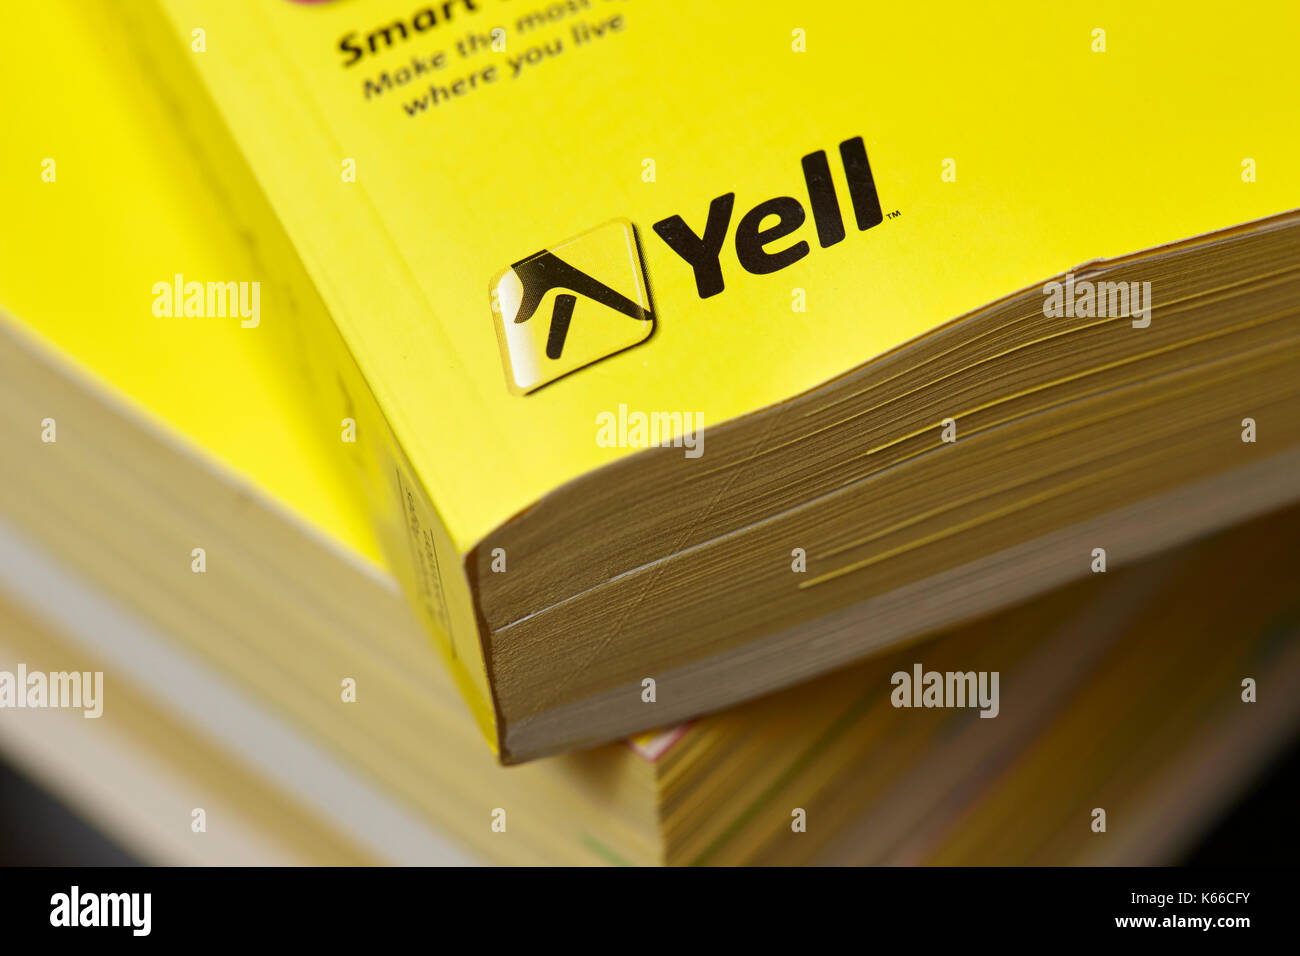 yell yellow pages classified telephone directory paper edition uk Stock Photo